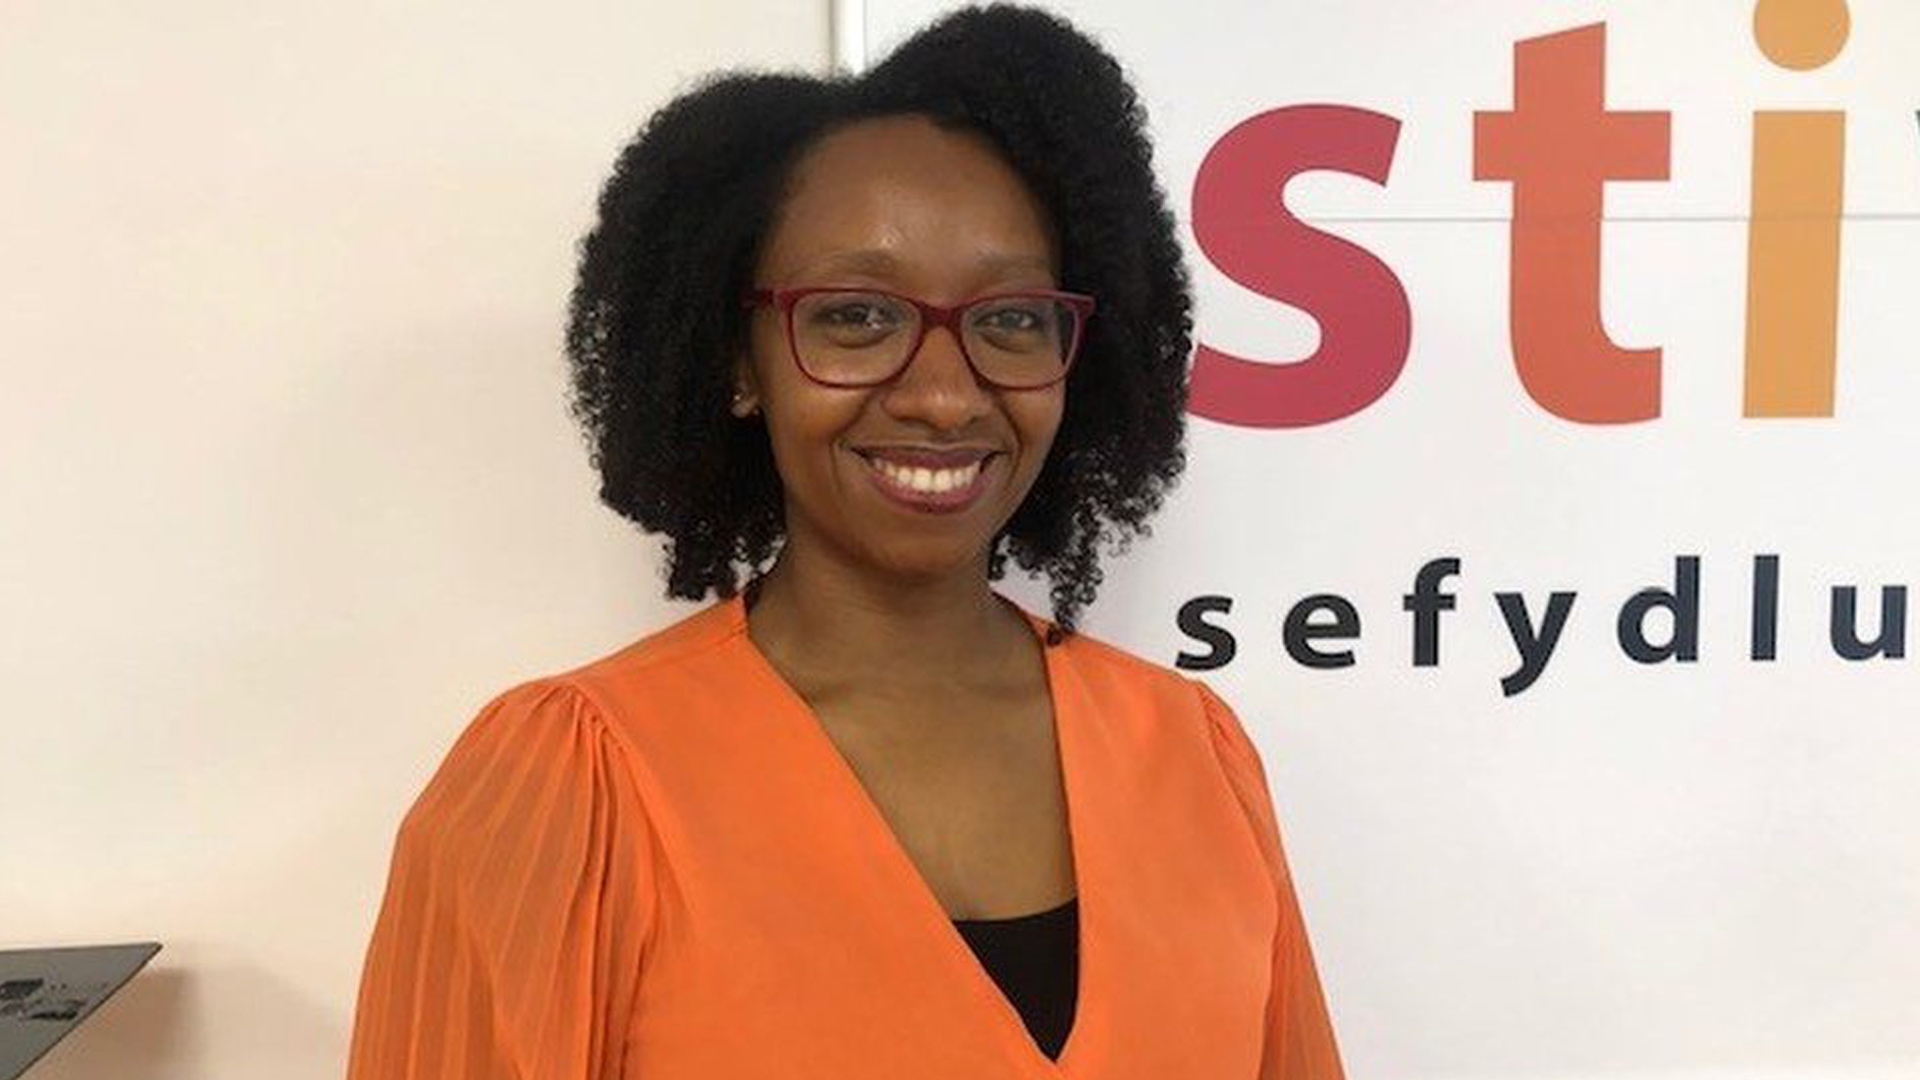 This Engineer Invented A Comb For 'Afro Hair' — Now, She's Working On Getting More Black Women Into Her Field